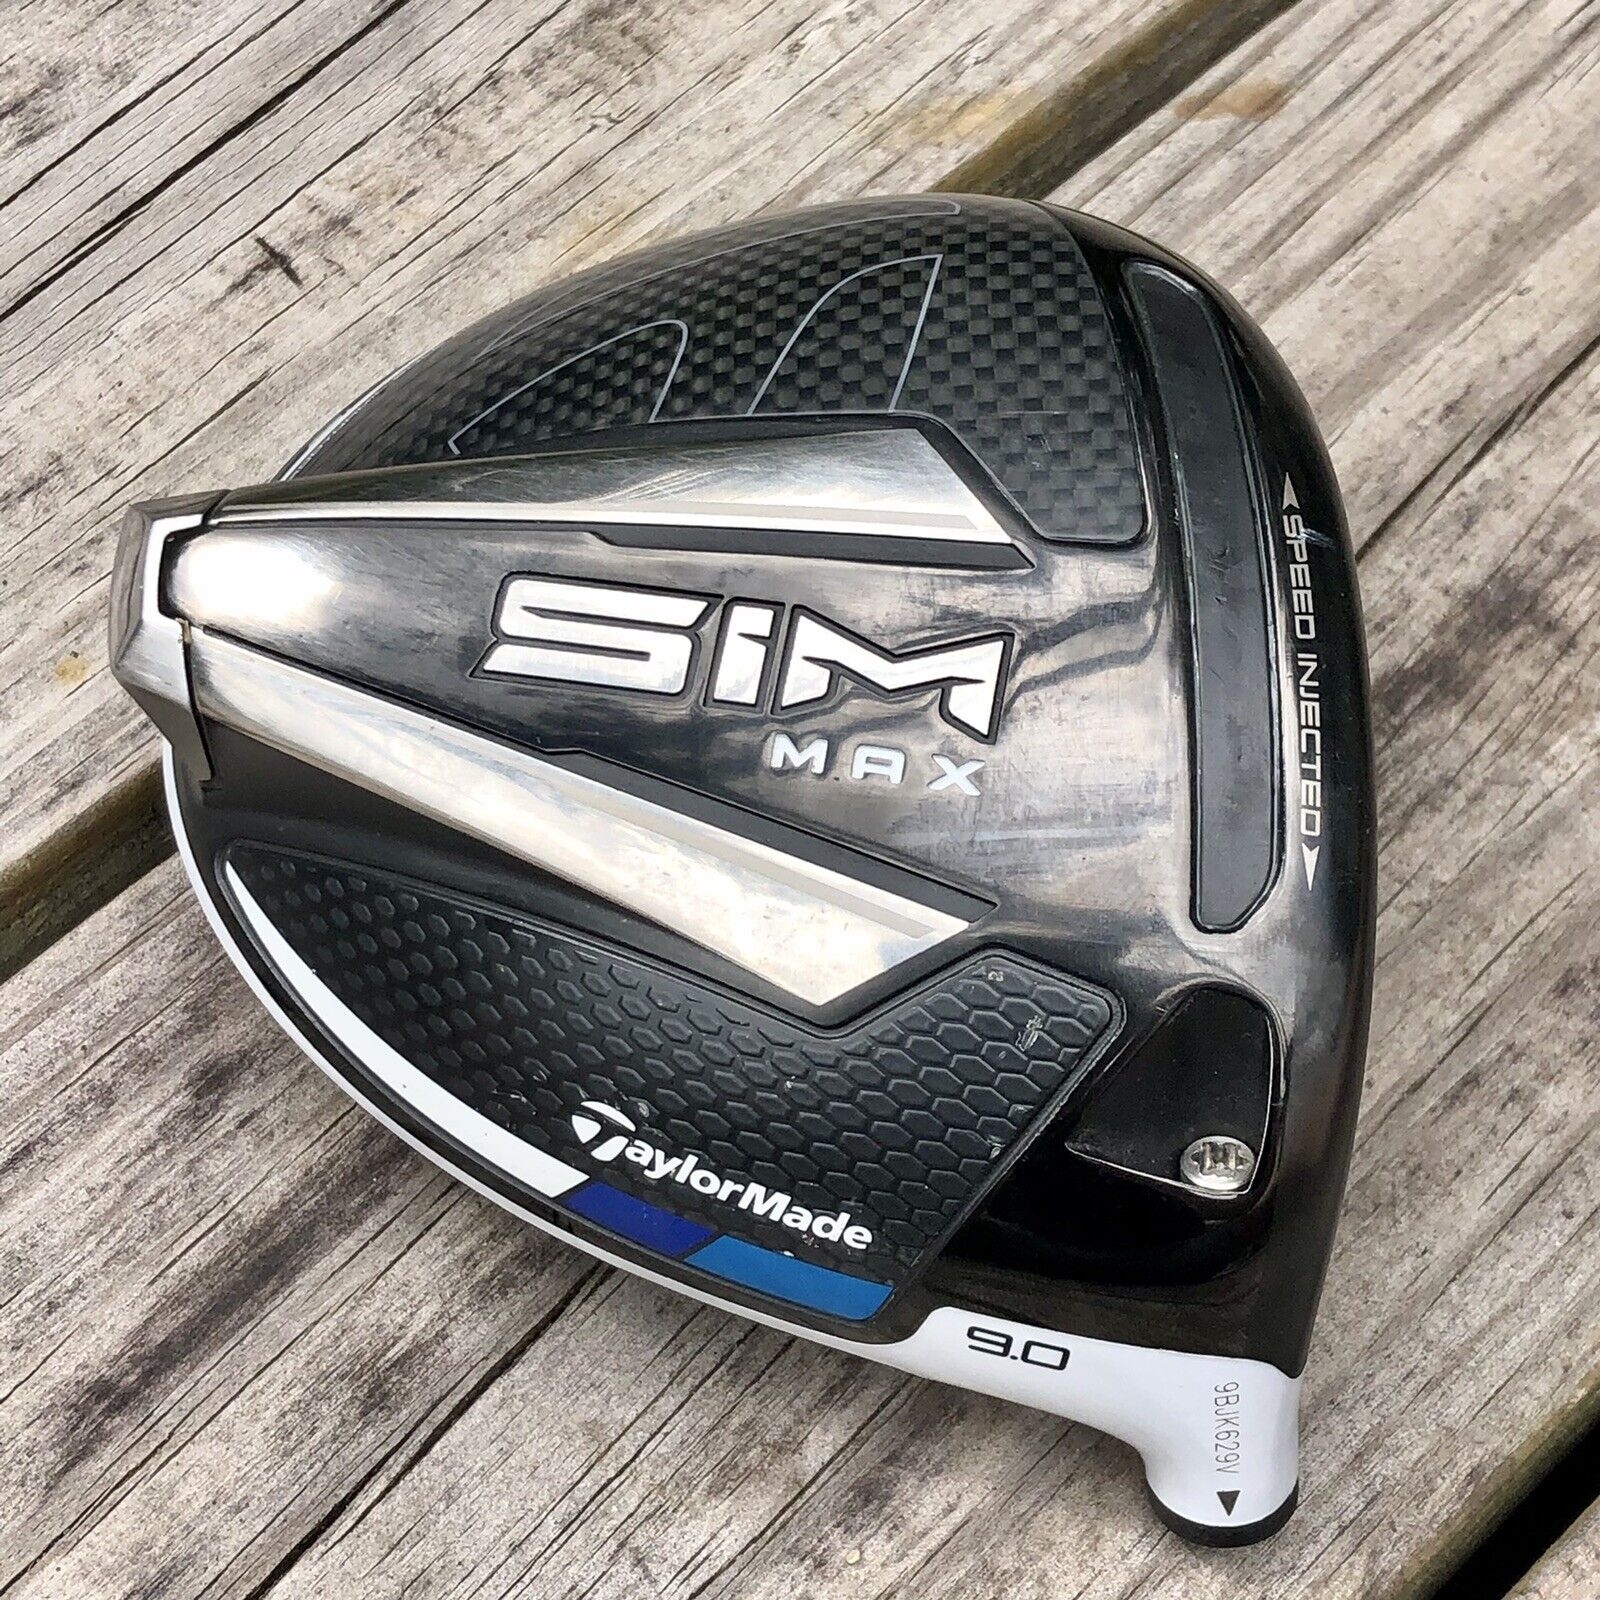 Taylormade SIM Max 9.0* Driver Head Right Handed